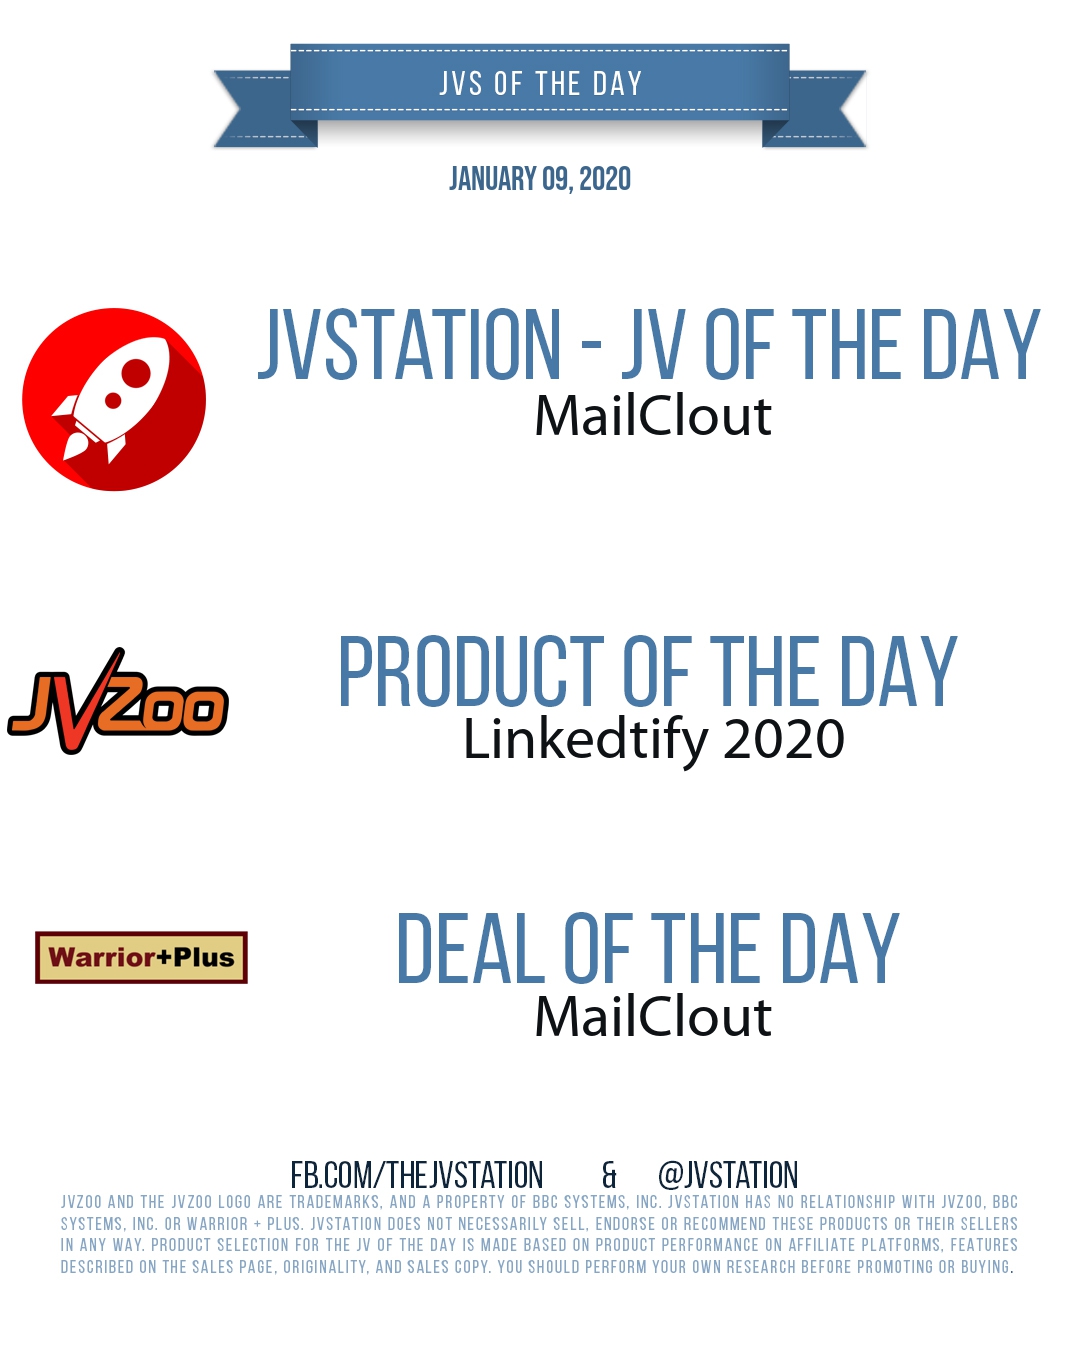 JVs of the day - January 09, 2020